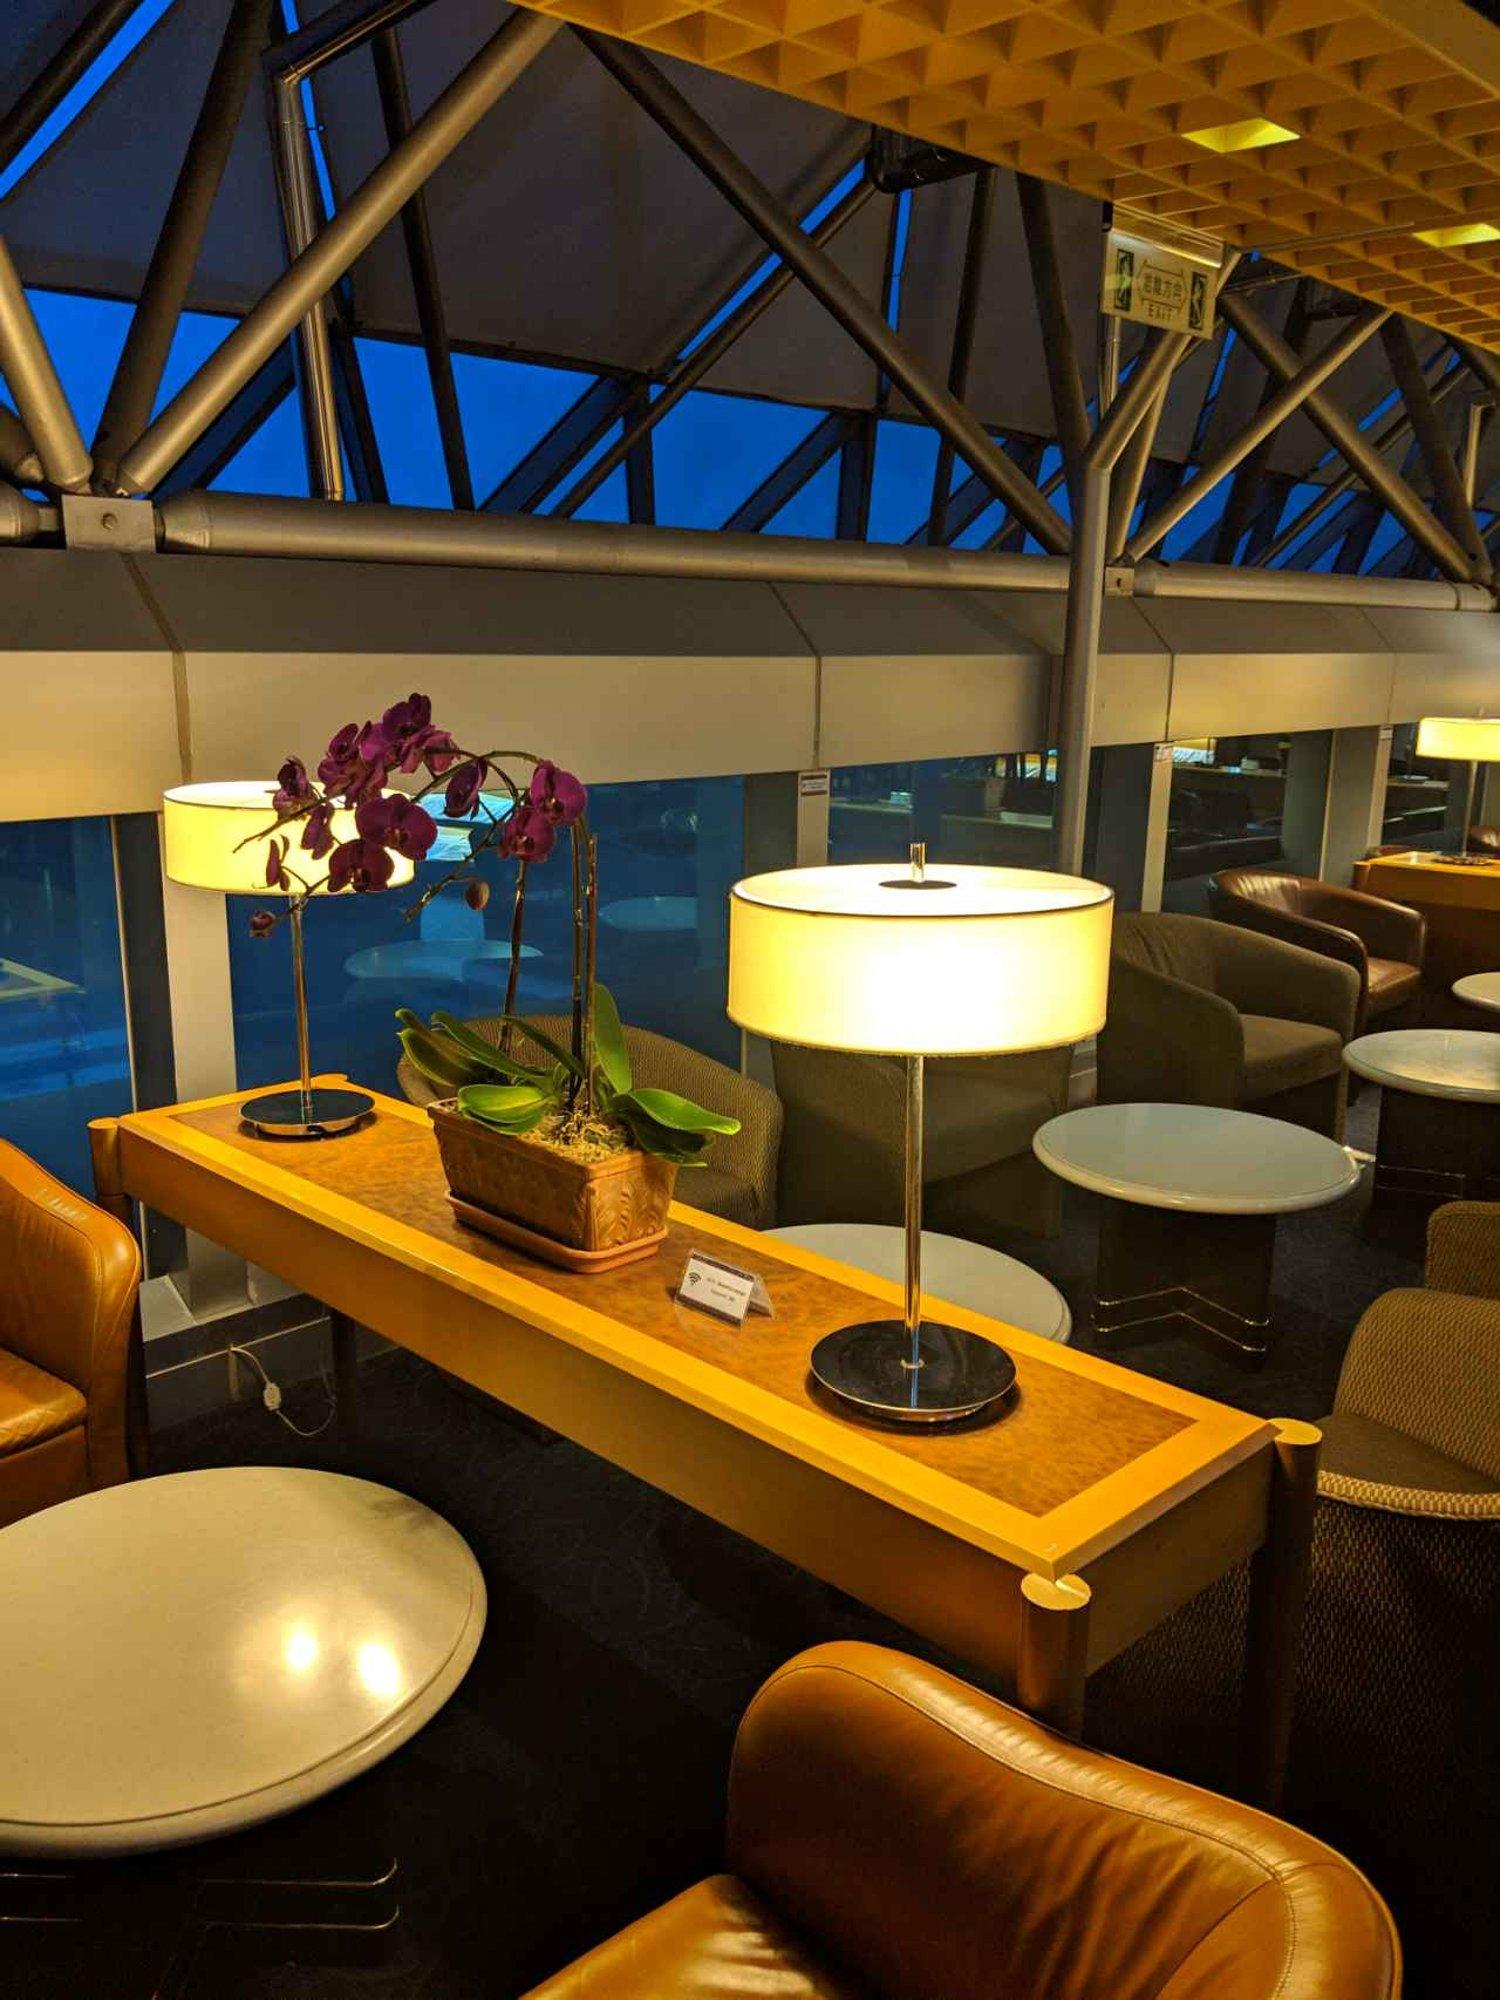 Singapore Airlines SilverKris Business Class Lounge image 12 of 14